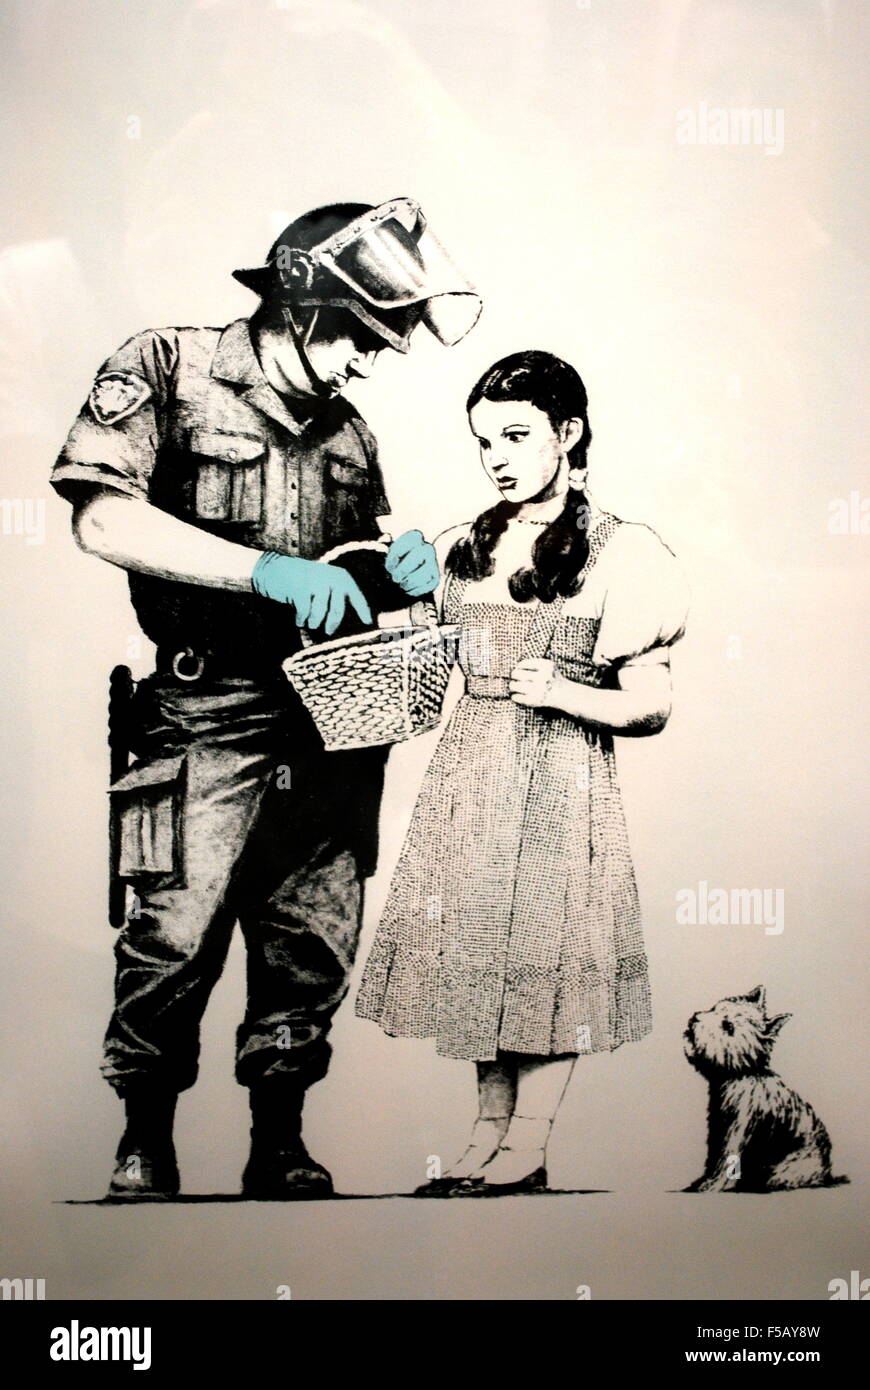 Banksy Artwork on display at Outpost, Art from the streets exhibition on Cockatoo island in Sydney, Australia. Stock Photo